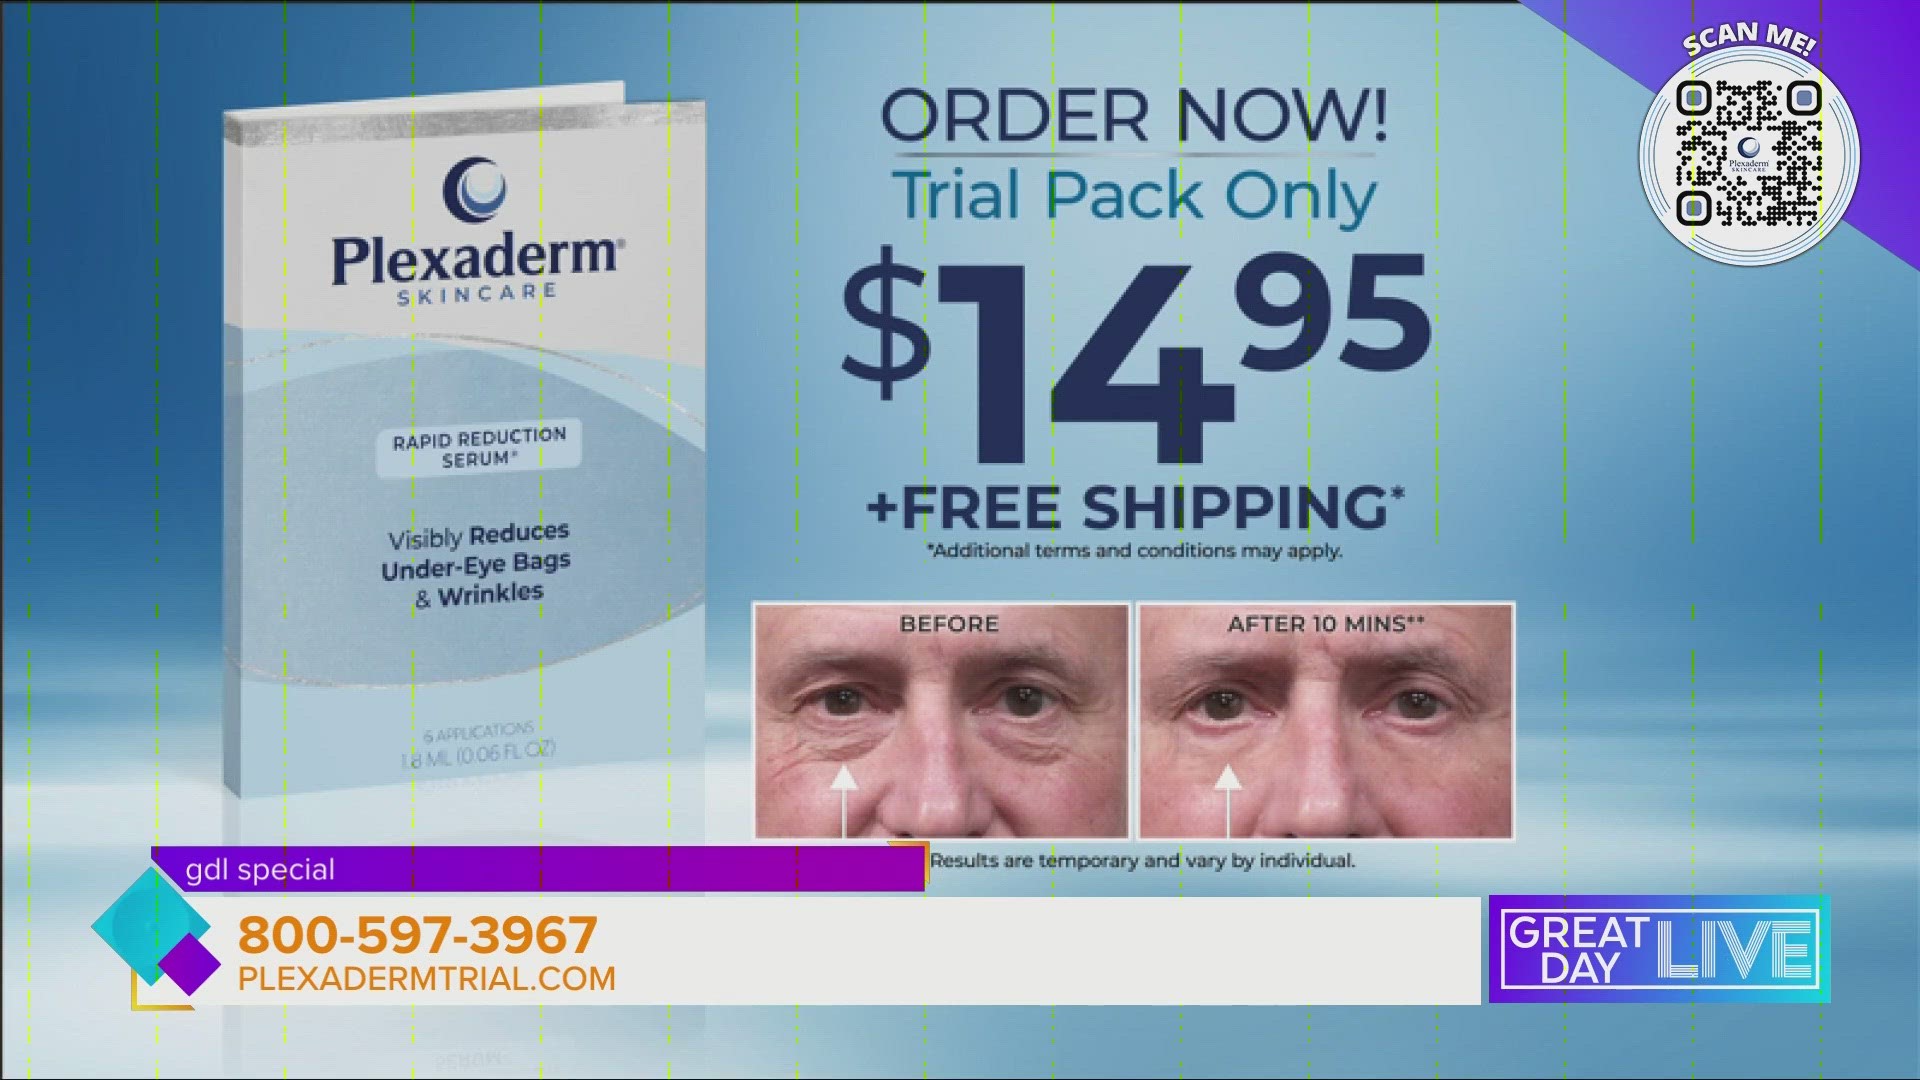 Paid segment sponsored by: Plexaderm. You can try Plexaderm for $14.95, plus free shipping. Just head to https://plxa.de/3lUdEW5